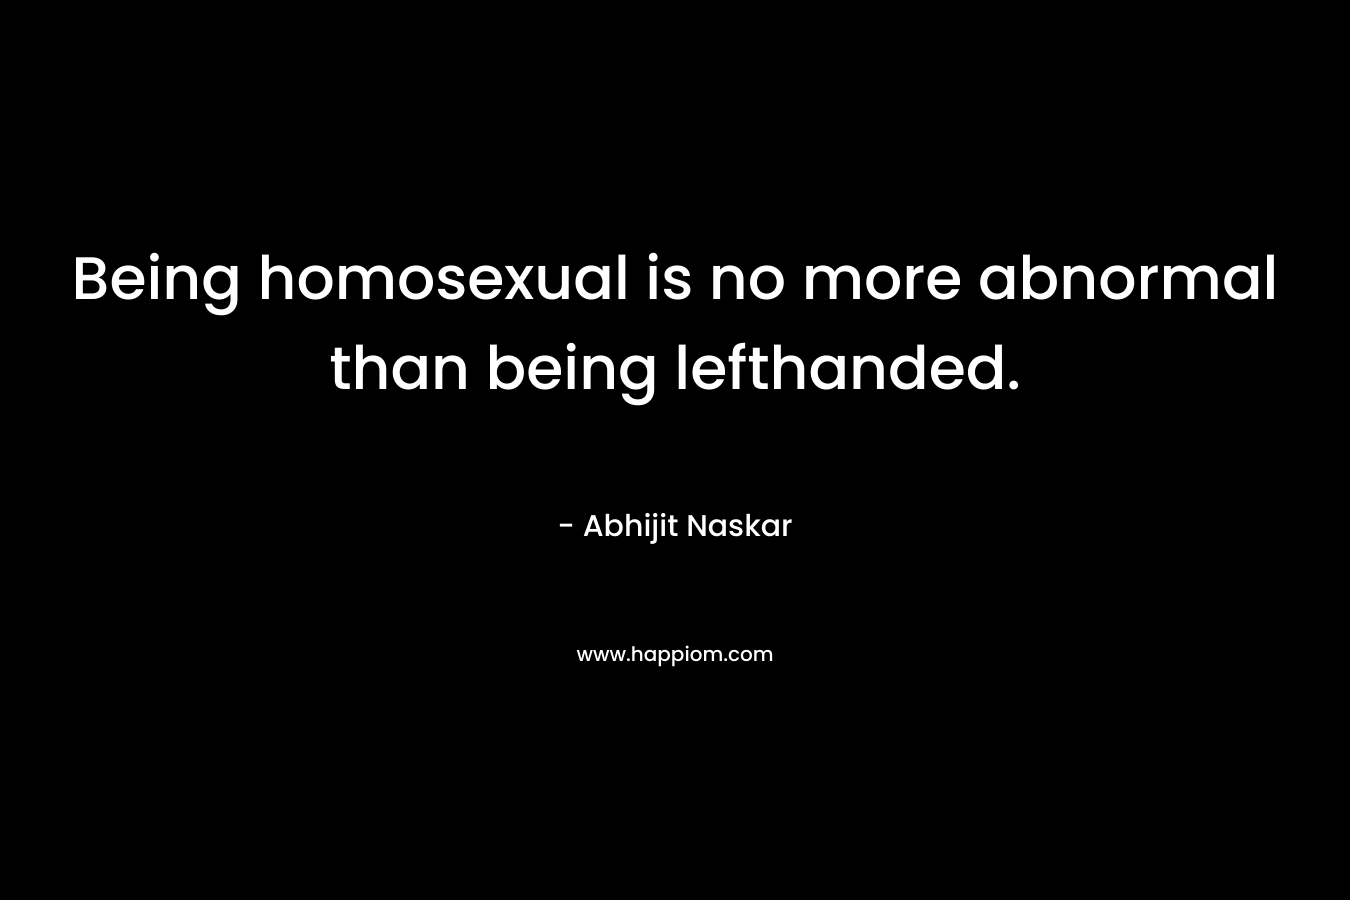 Being homosexual is no more abnormal than being lefthanded.